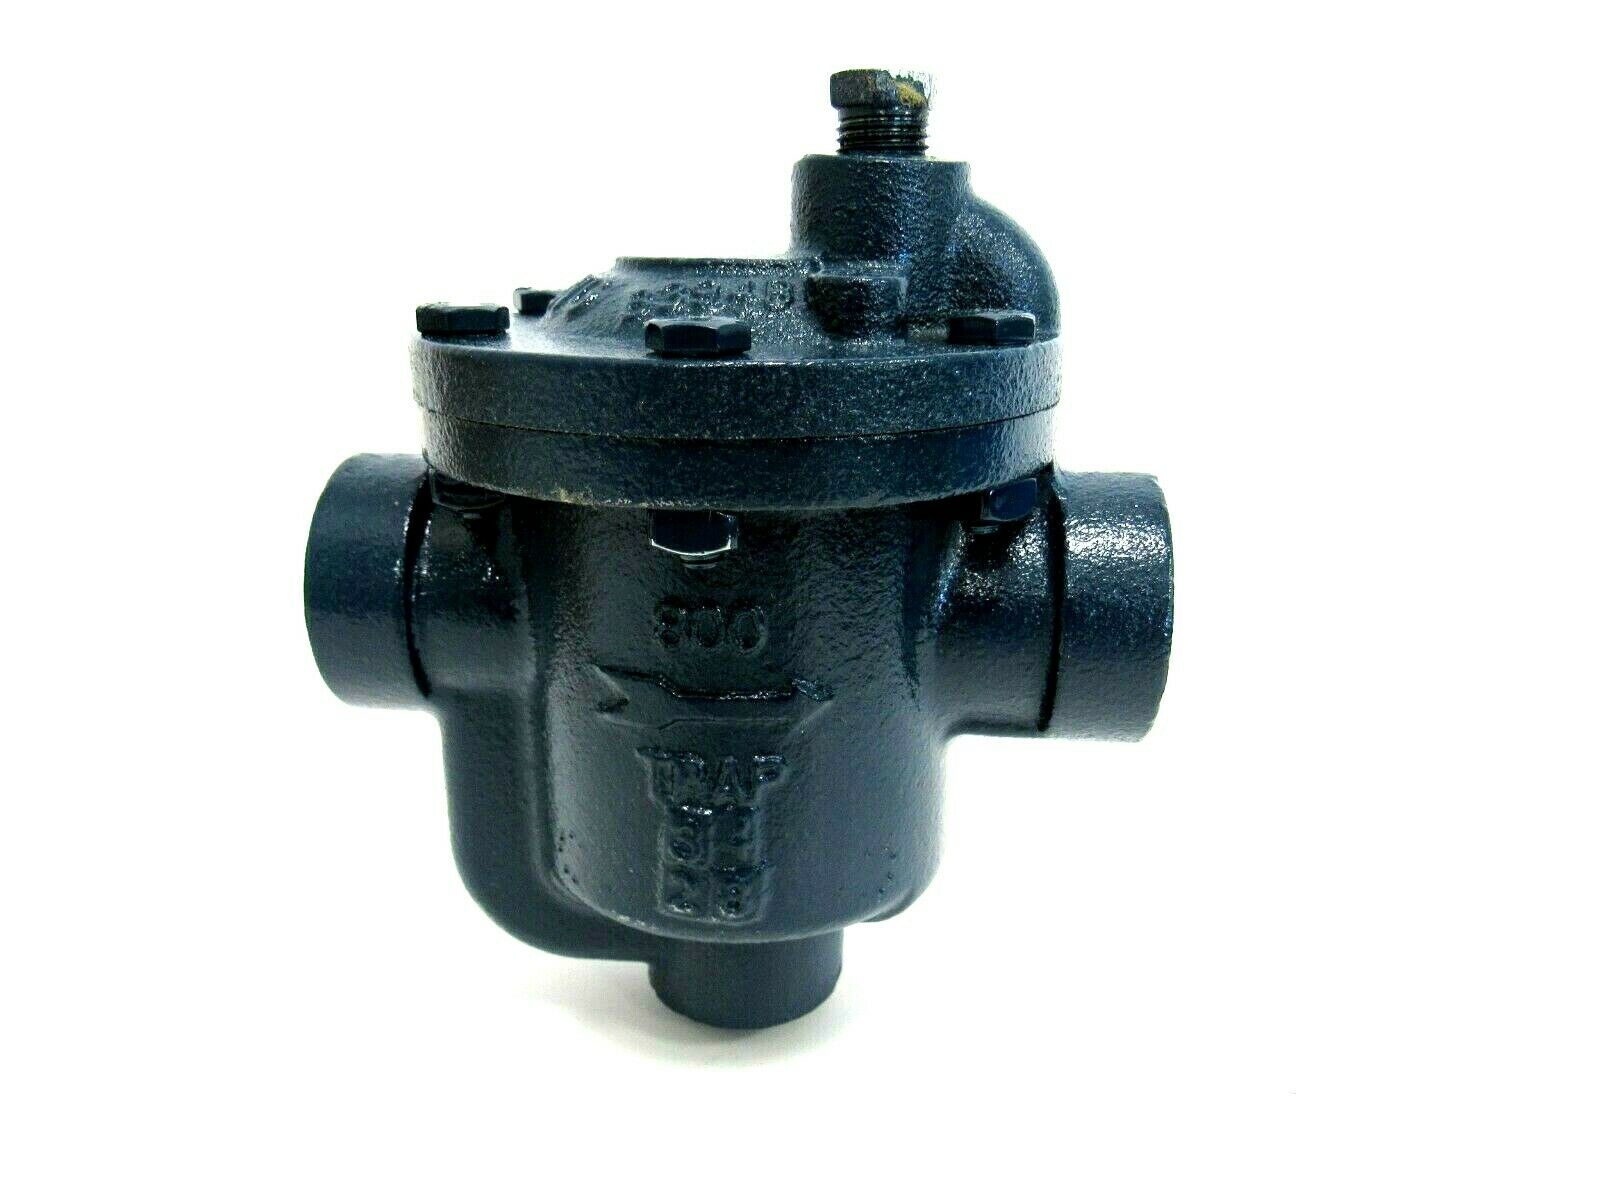 NEW ARMSTRONG C5297-6 STEAM TRAP 800 3/4 NPT 3/16 C52976 – SB ...